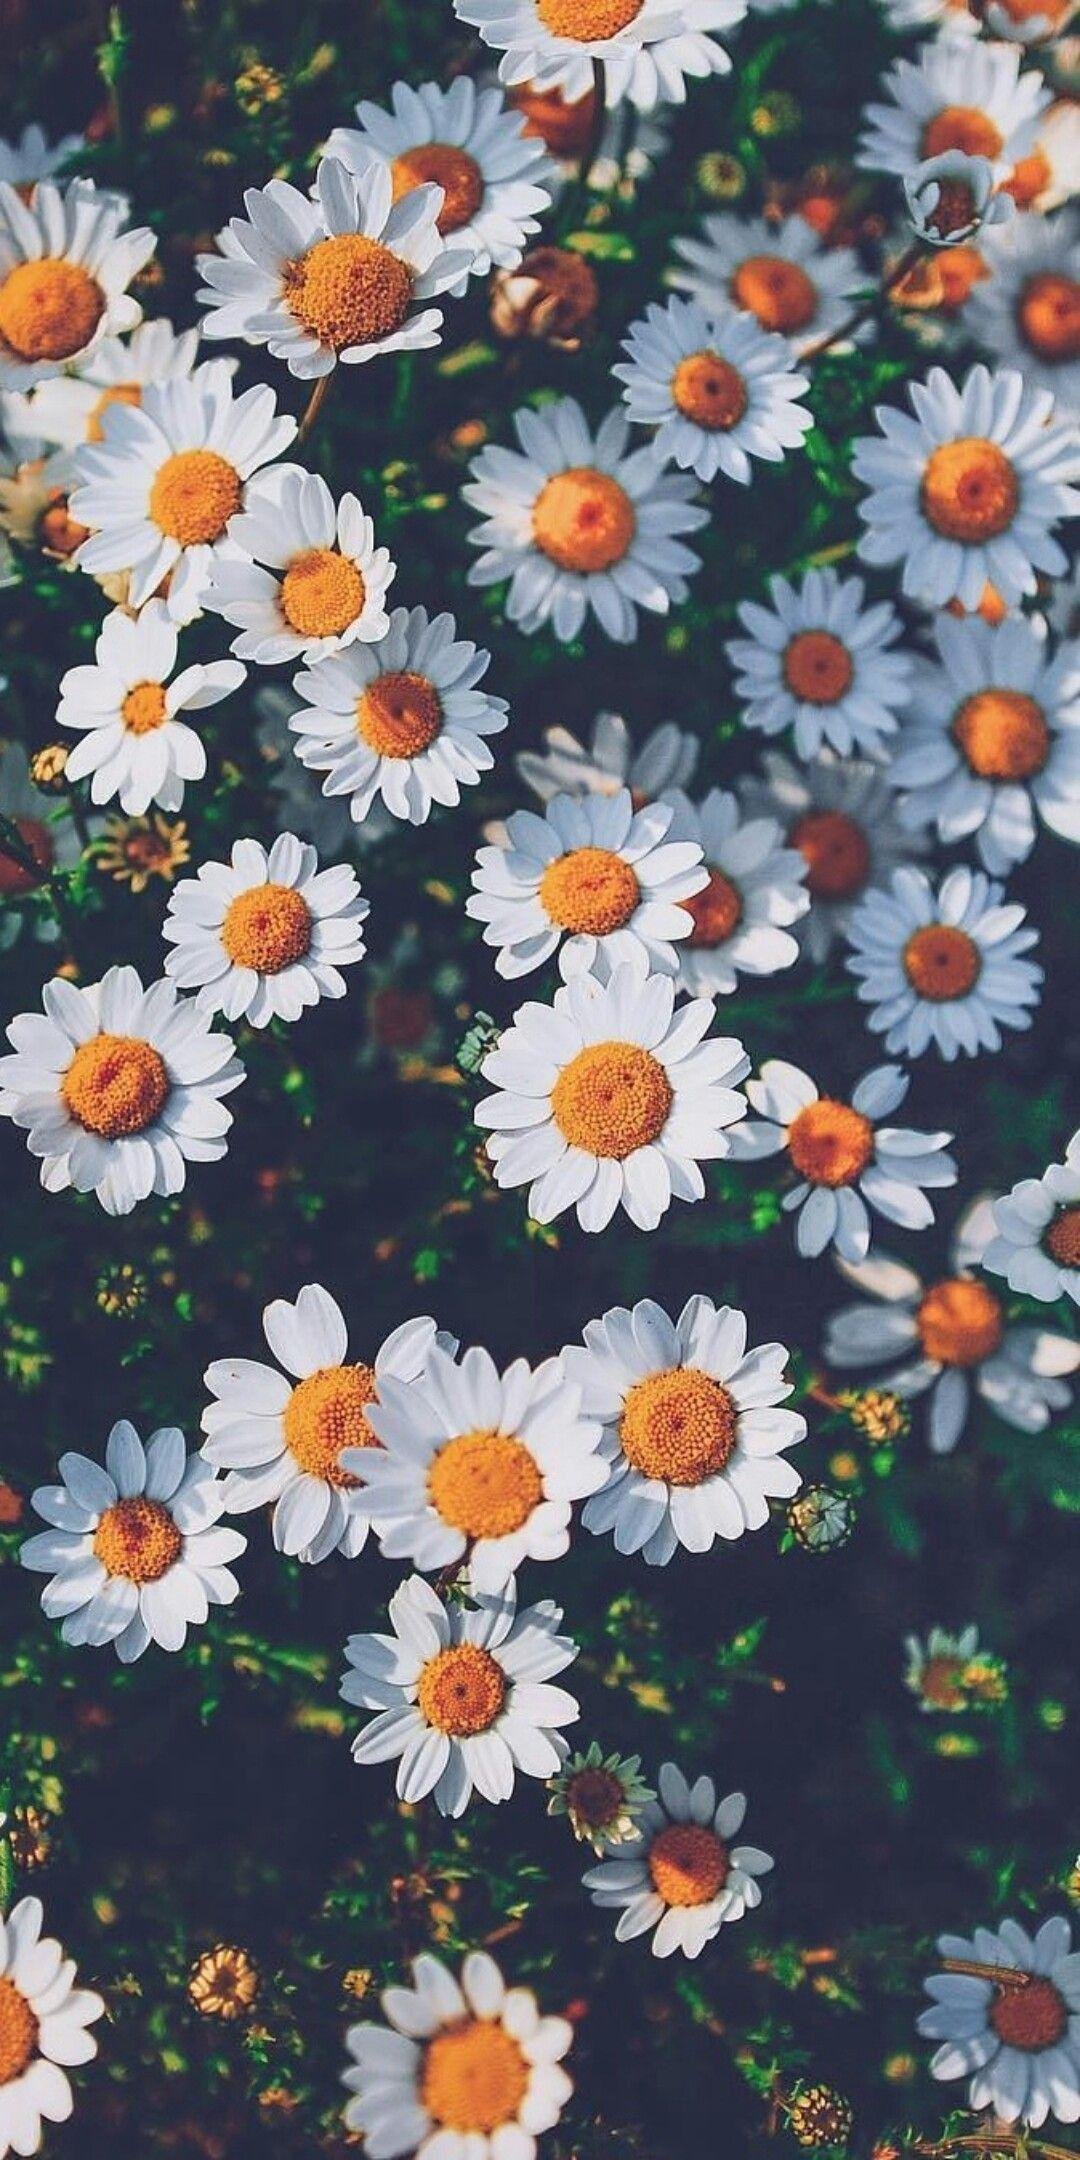 Aesthetic Daisy Flower Wallpaper Background Wallpaper Image For Free  Download  Pngtree